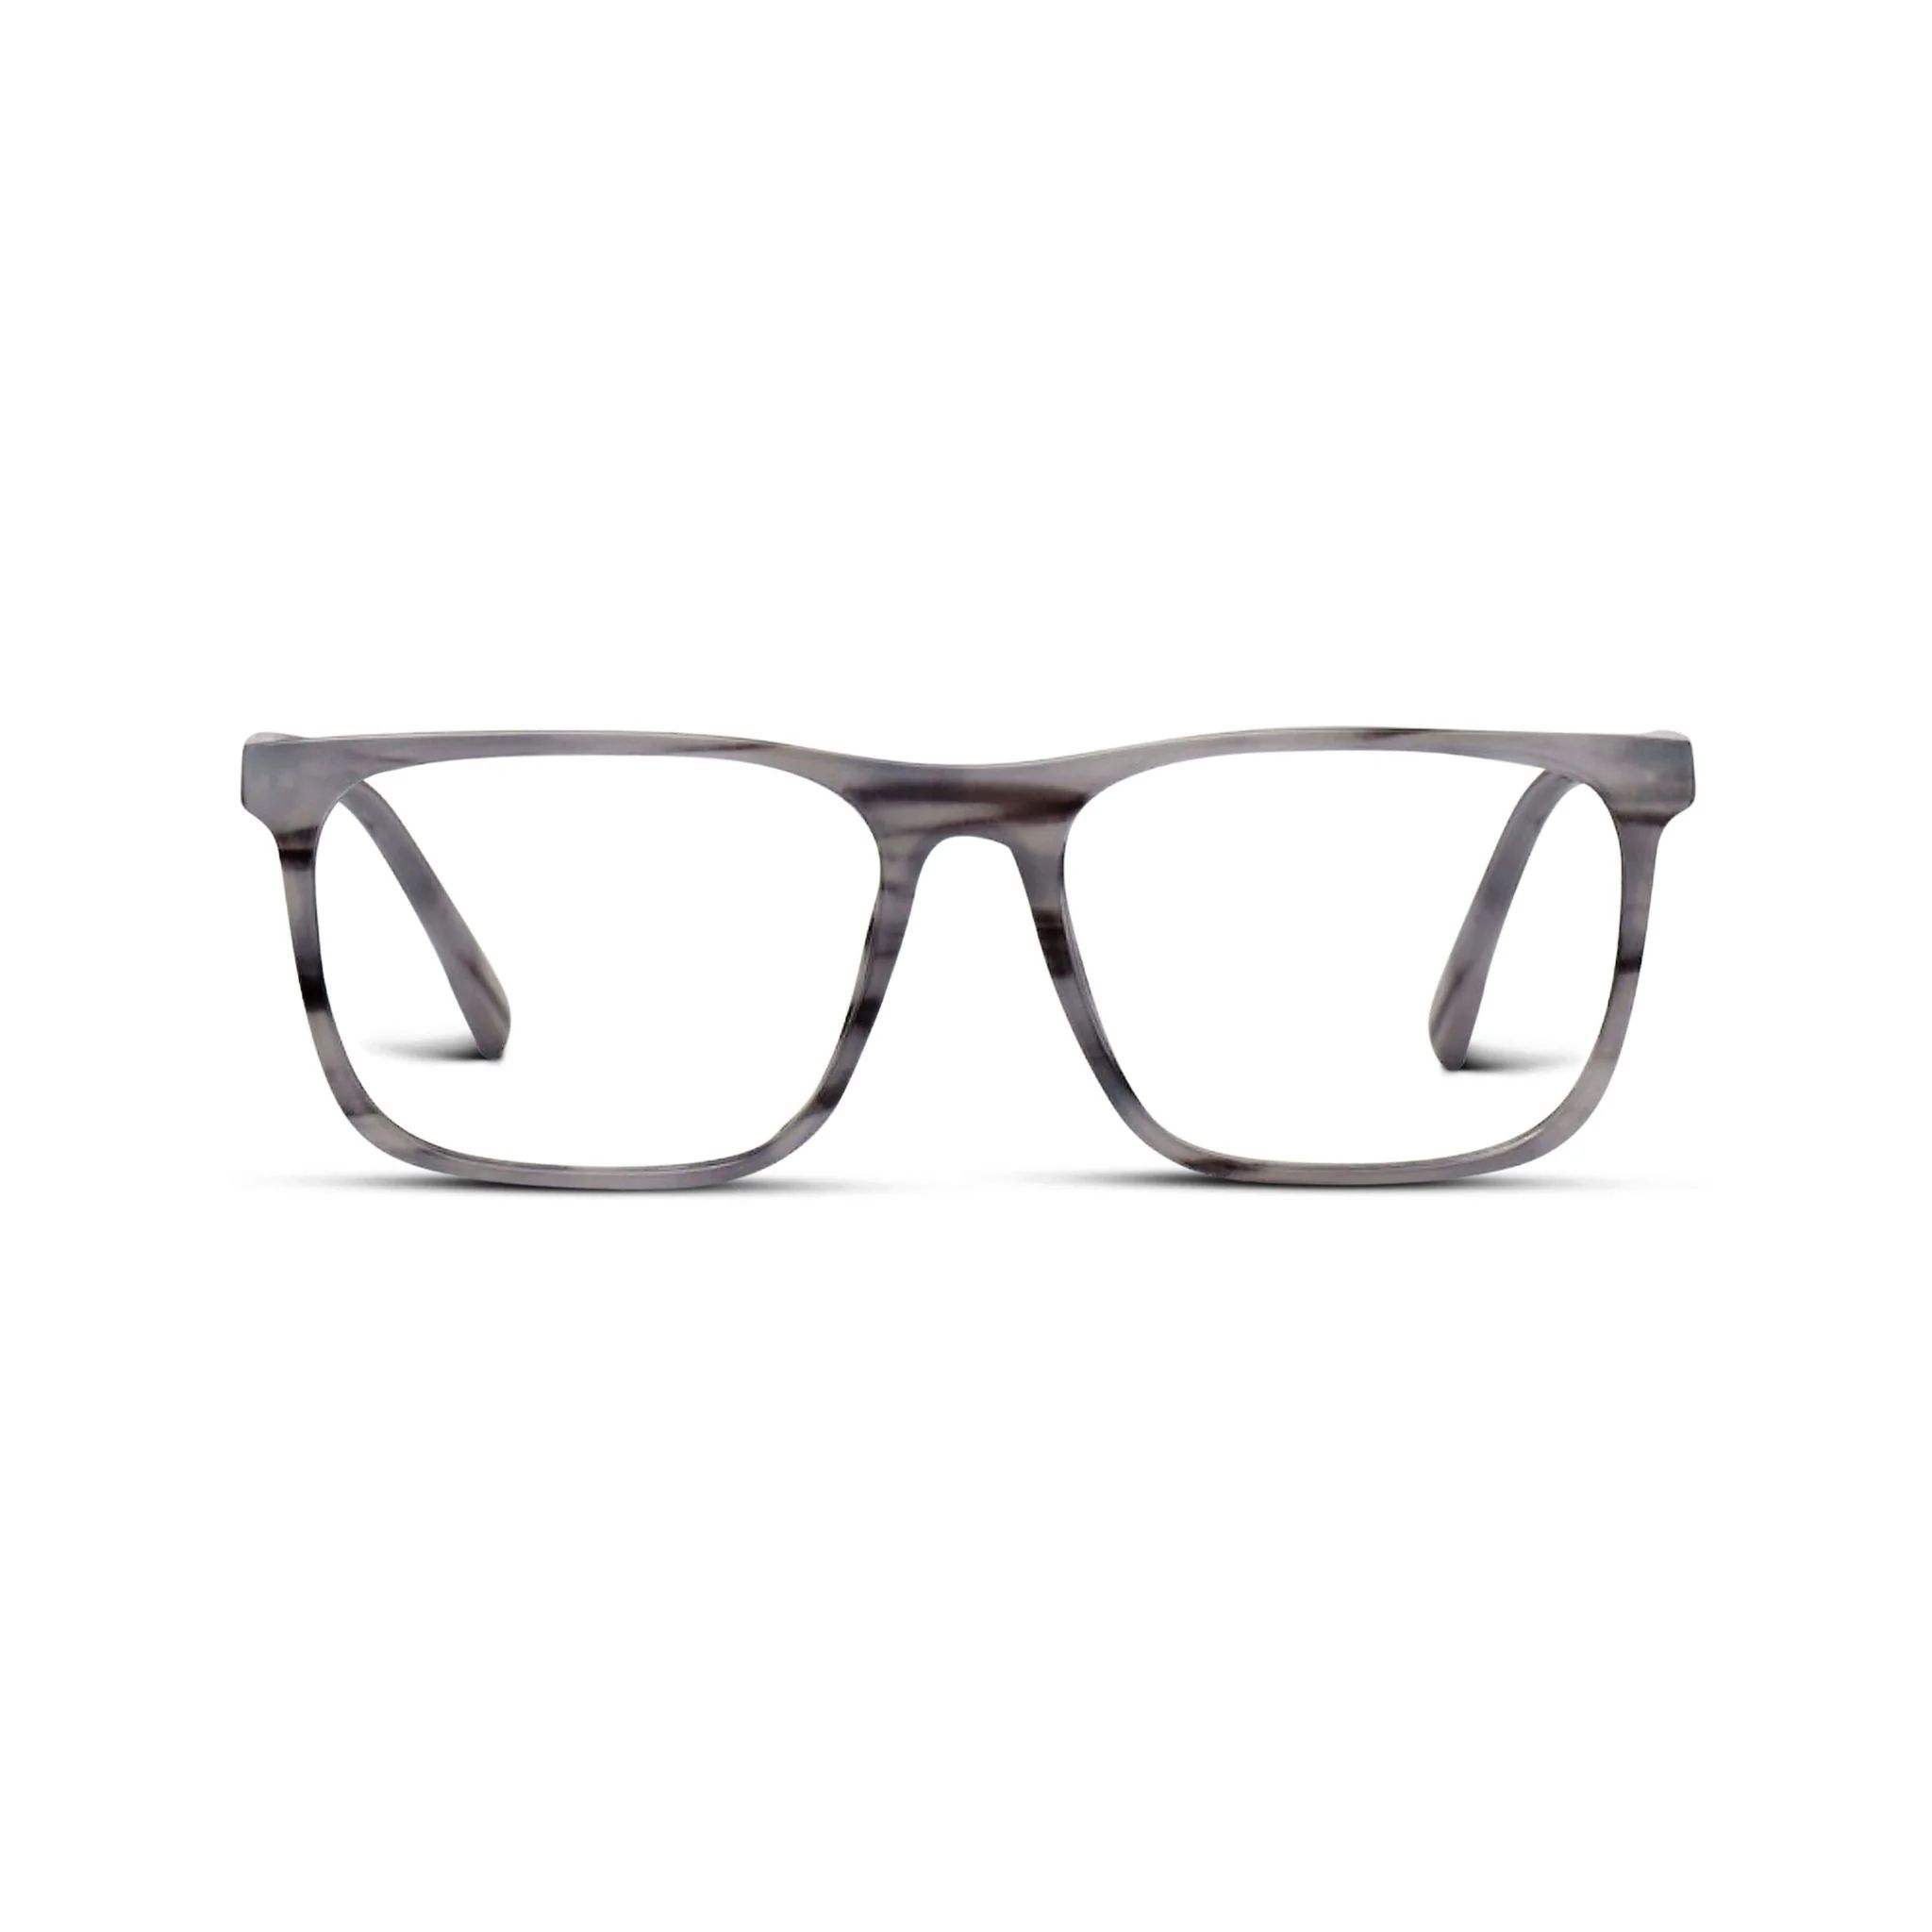 Highbrow (Blue Light) - Gray Horn / Reading / 1.00 - Peepers by PeeperSpecs | Peepers